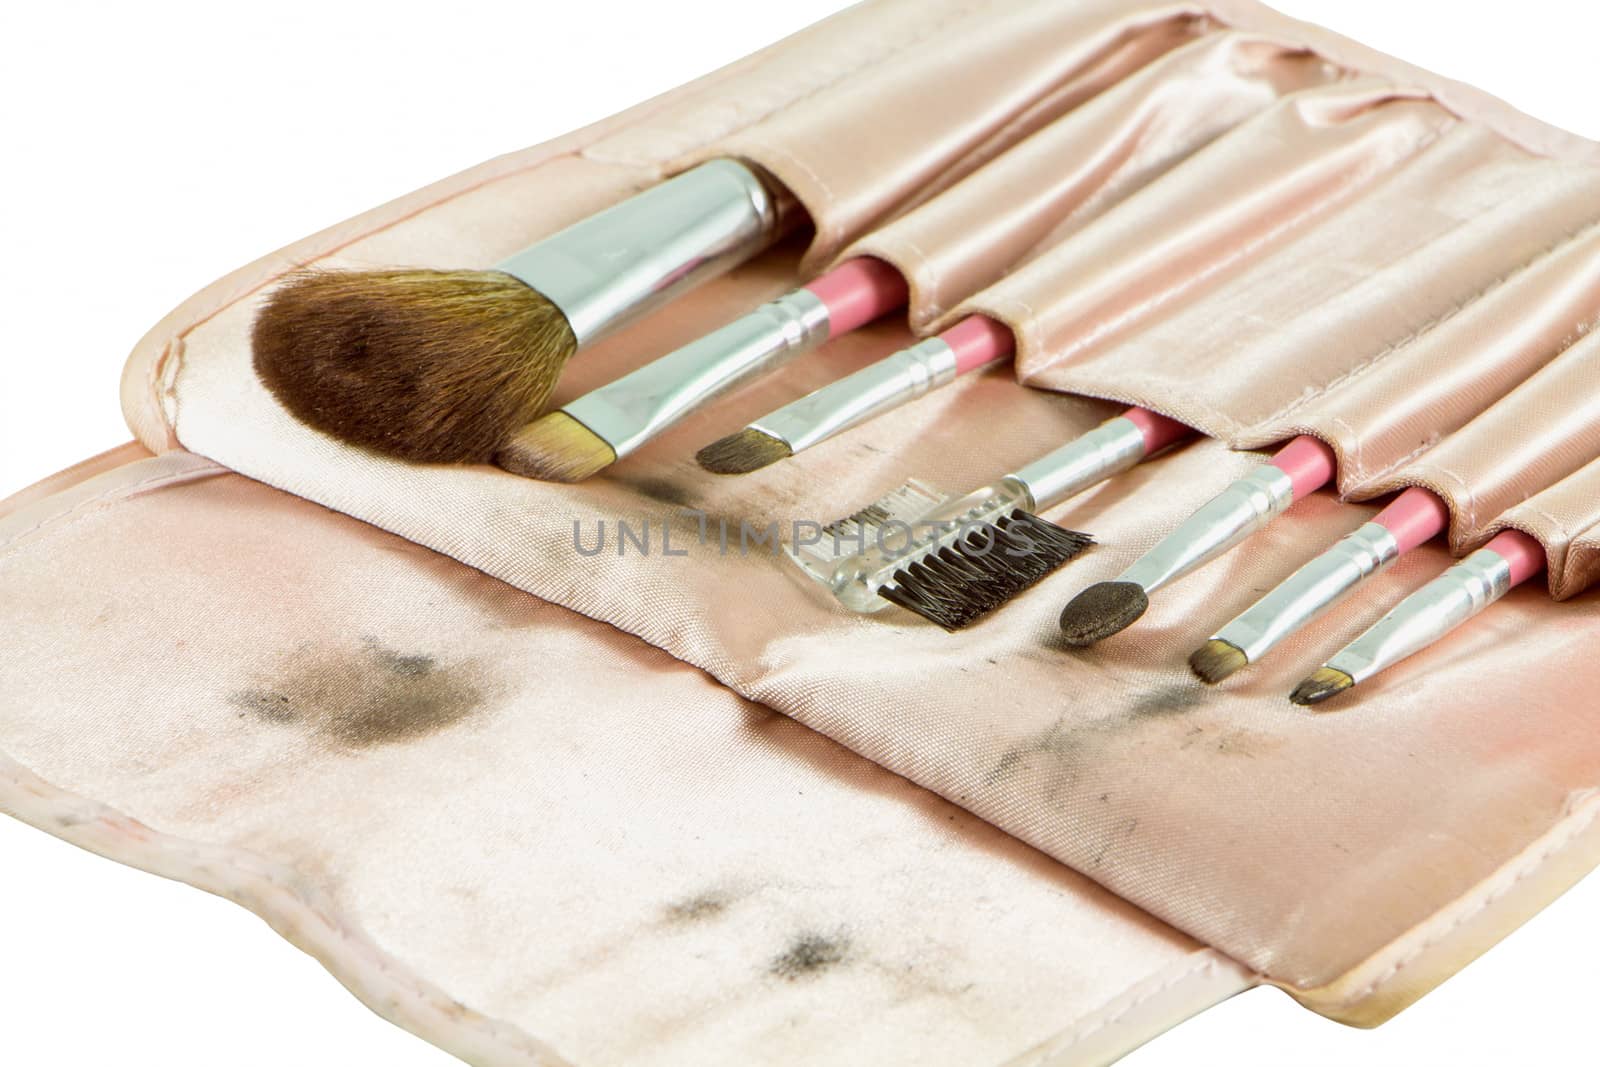 Dirty cosmetic brushes isolate on a white background.